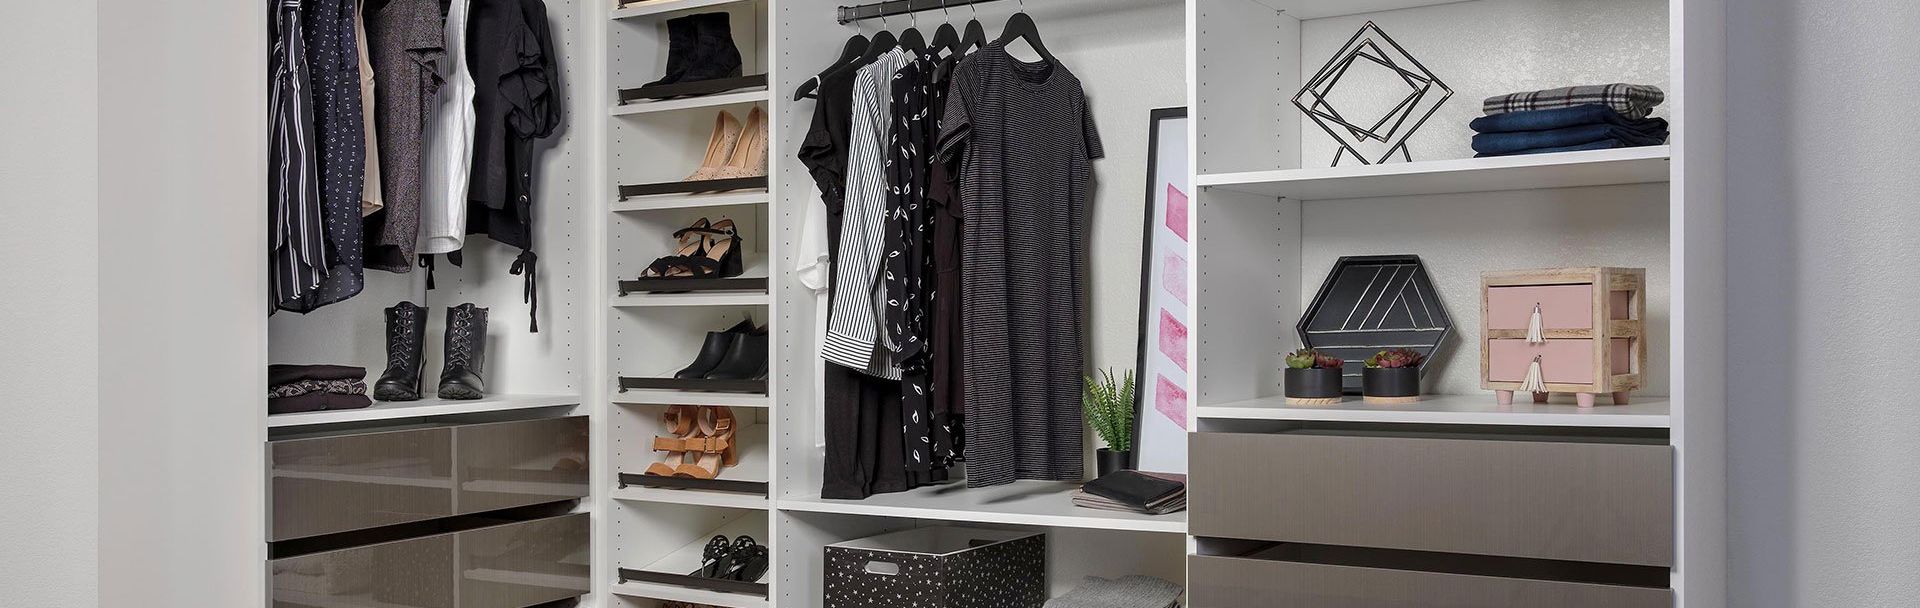 A walk in closet filled with clothes and a mirror.